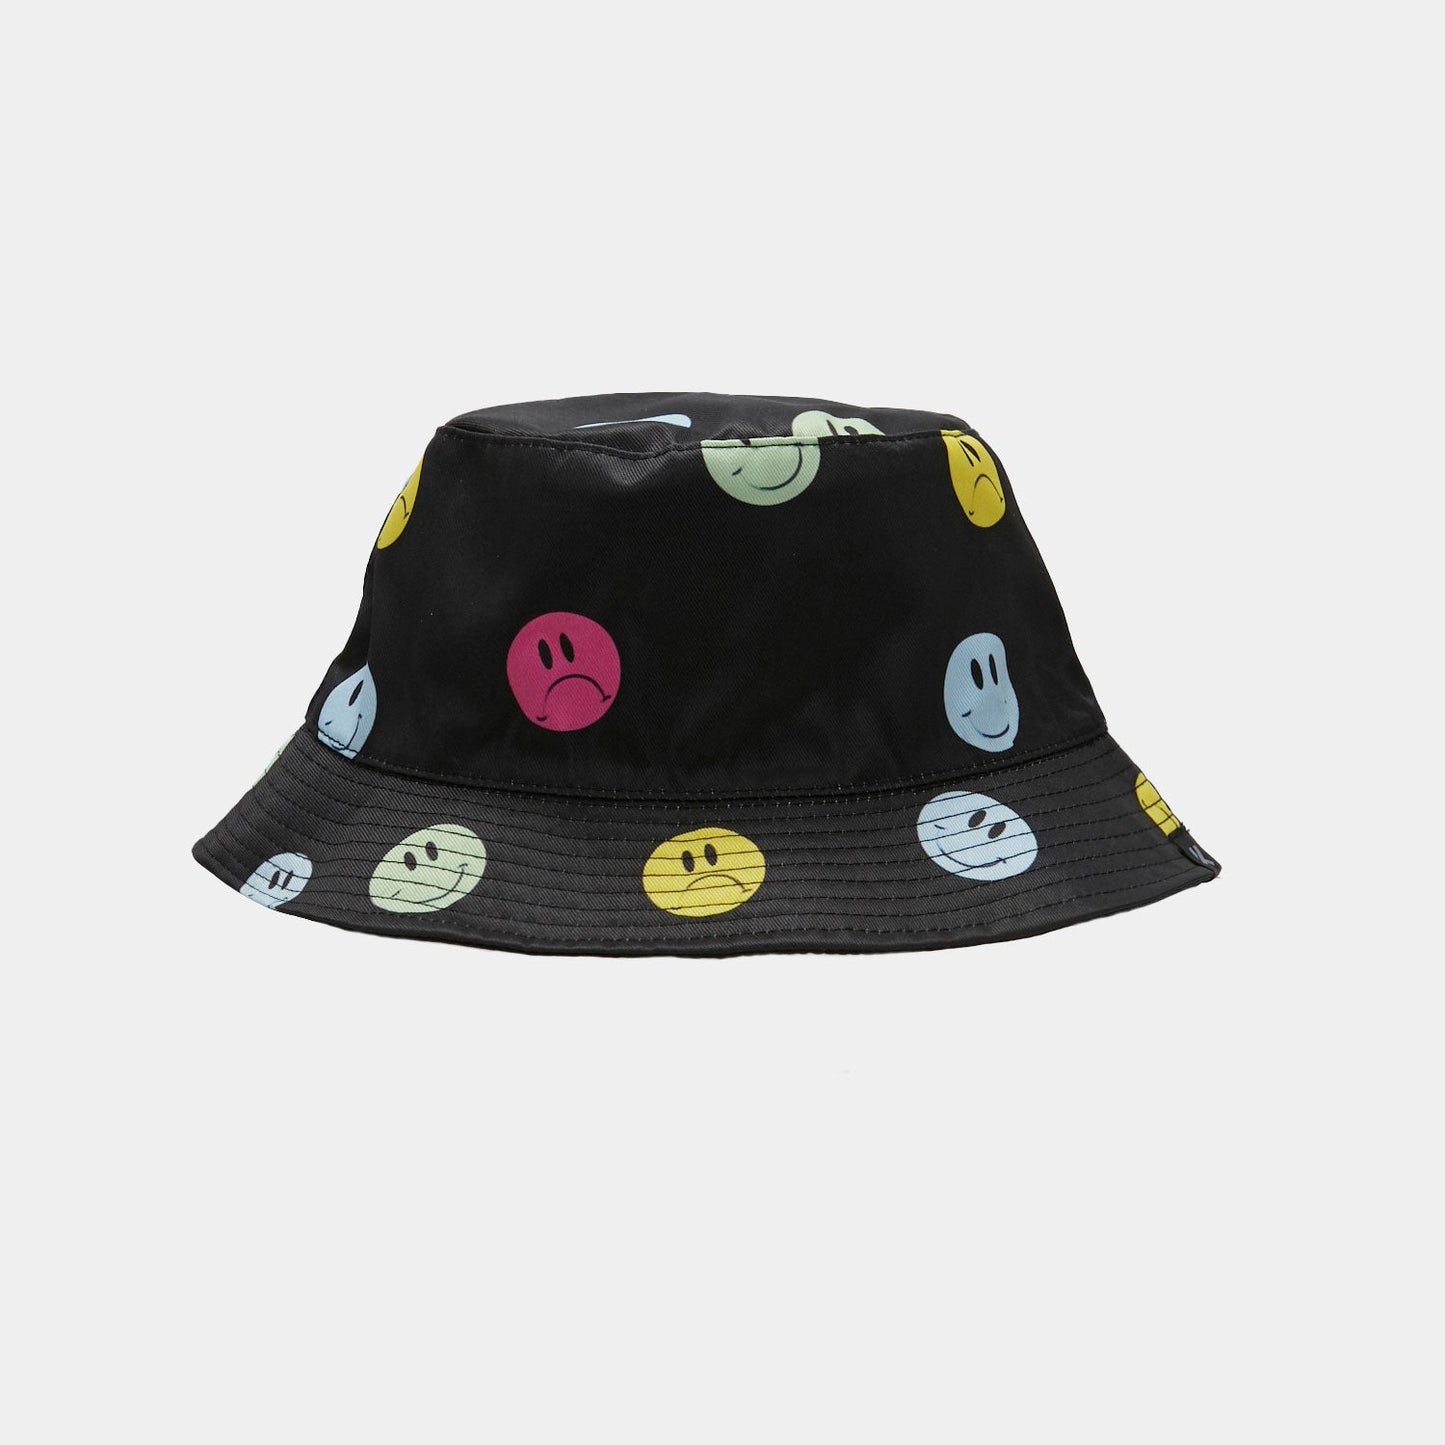 Mixed Emotions Black Bucket Hat - Accessories - KOI Footwear - Black - Front View